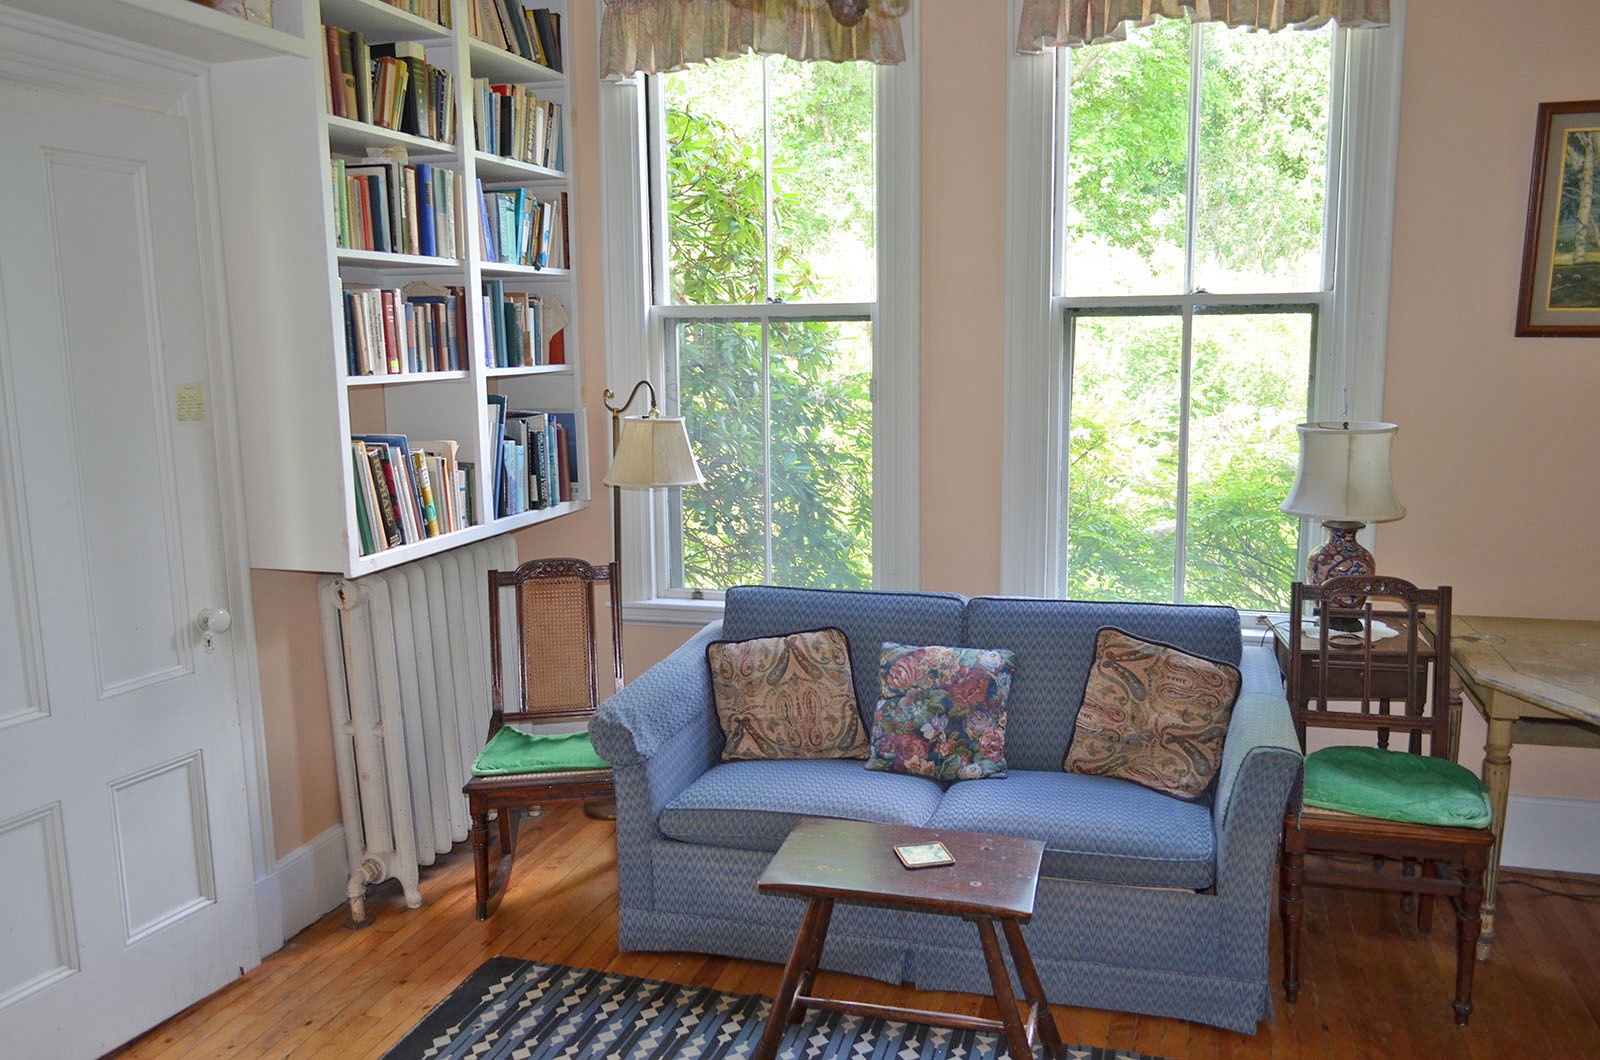 Relax with a book in a sunny sitting area off of the kitchen.